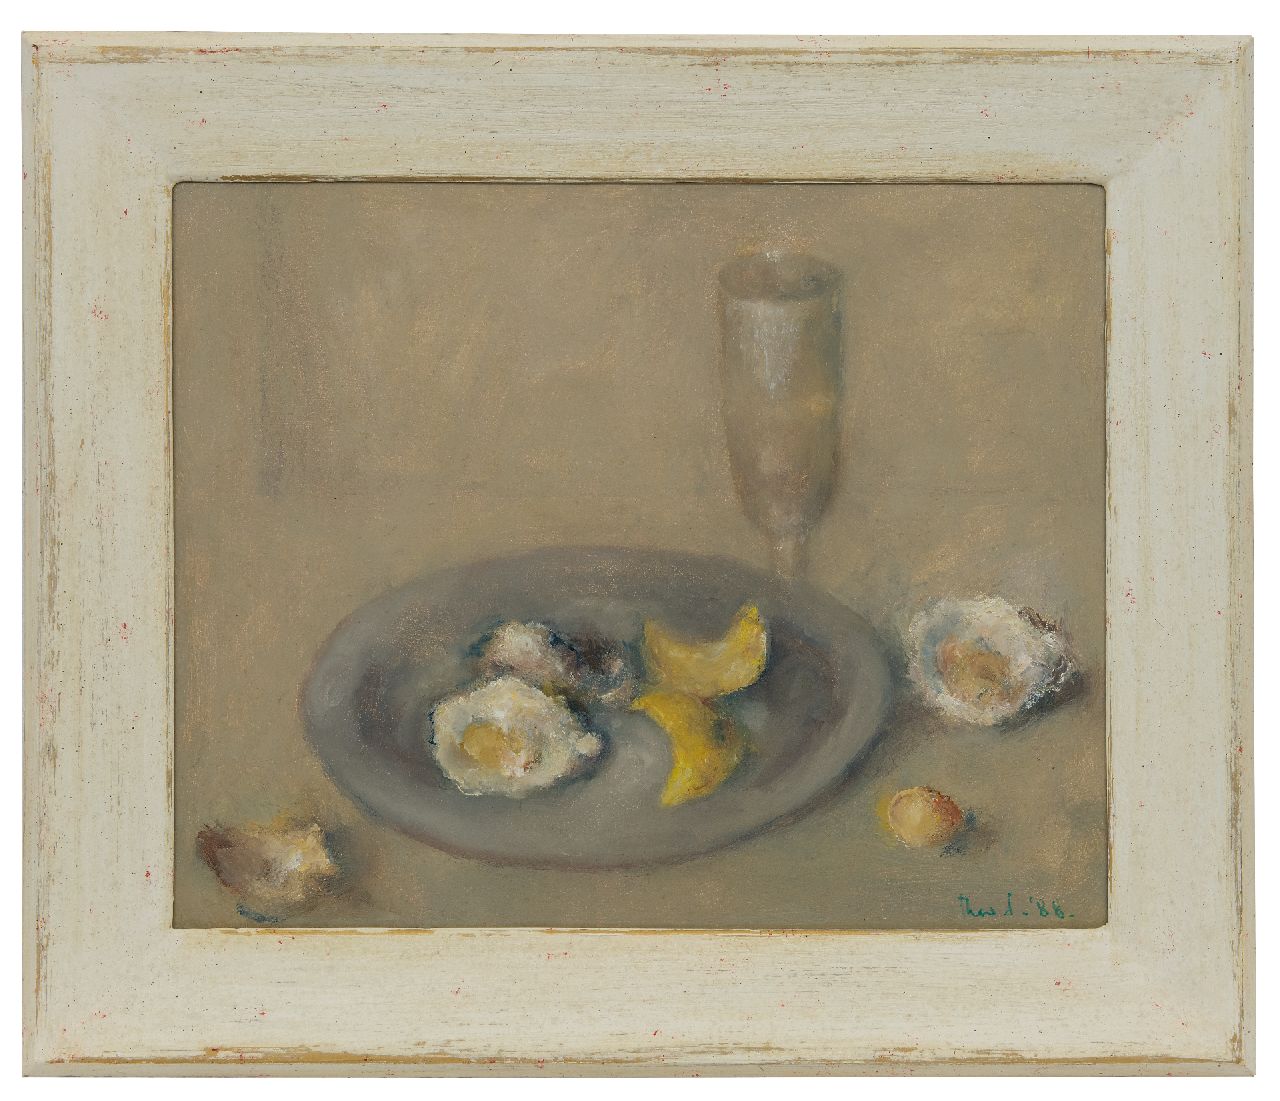 Swagemakers T.  | Theo Swagemakers, Still life with oysters and lemon peels on a pewter plate, oil on panel 39.5 x 49.4 cm, signed l.r. and dated '88